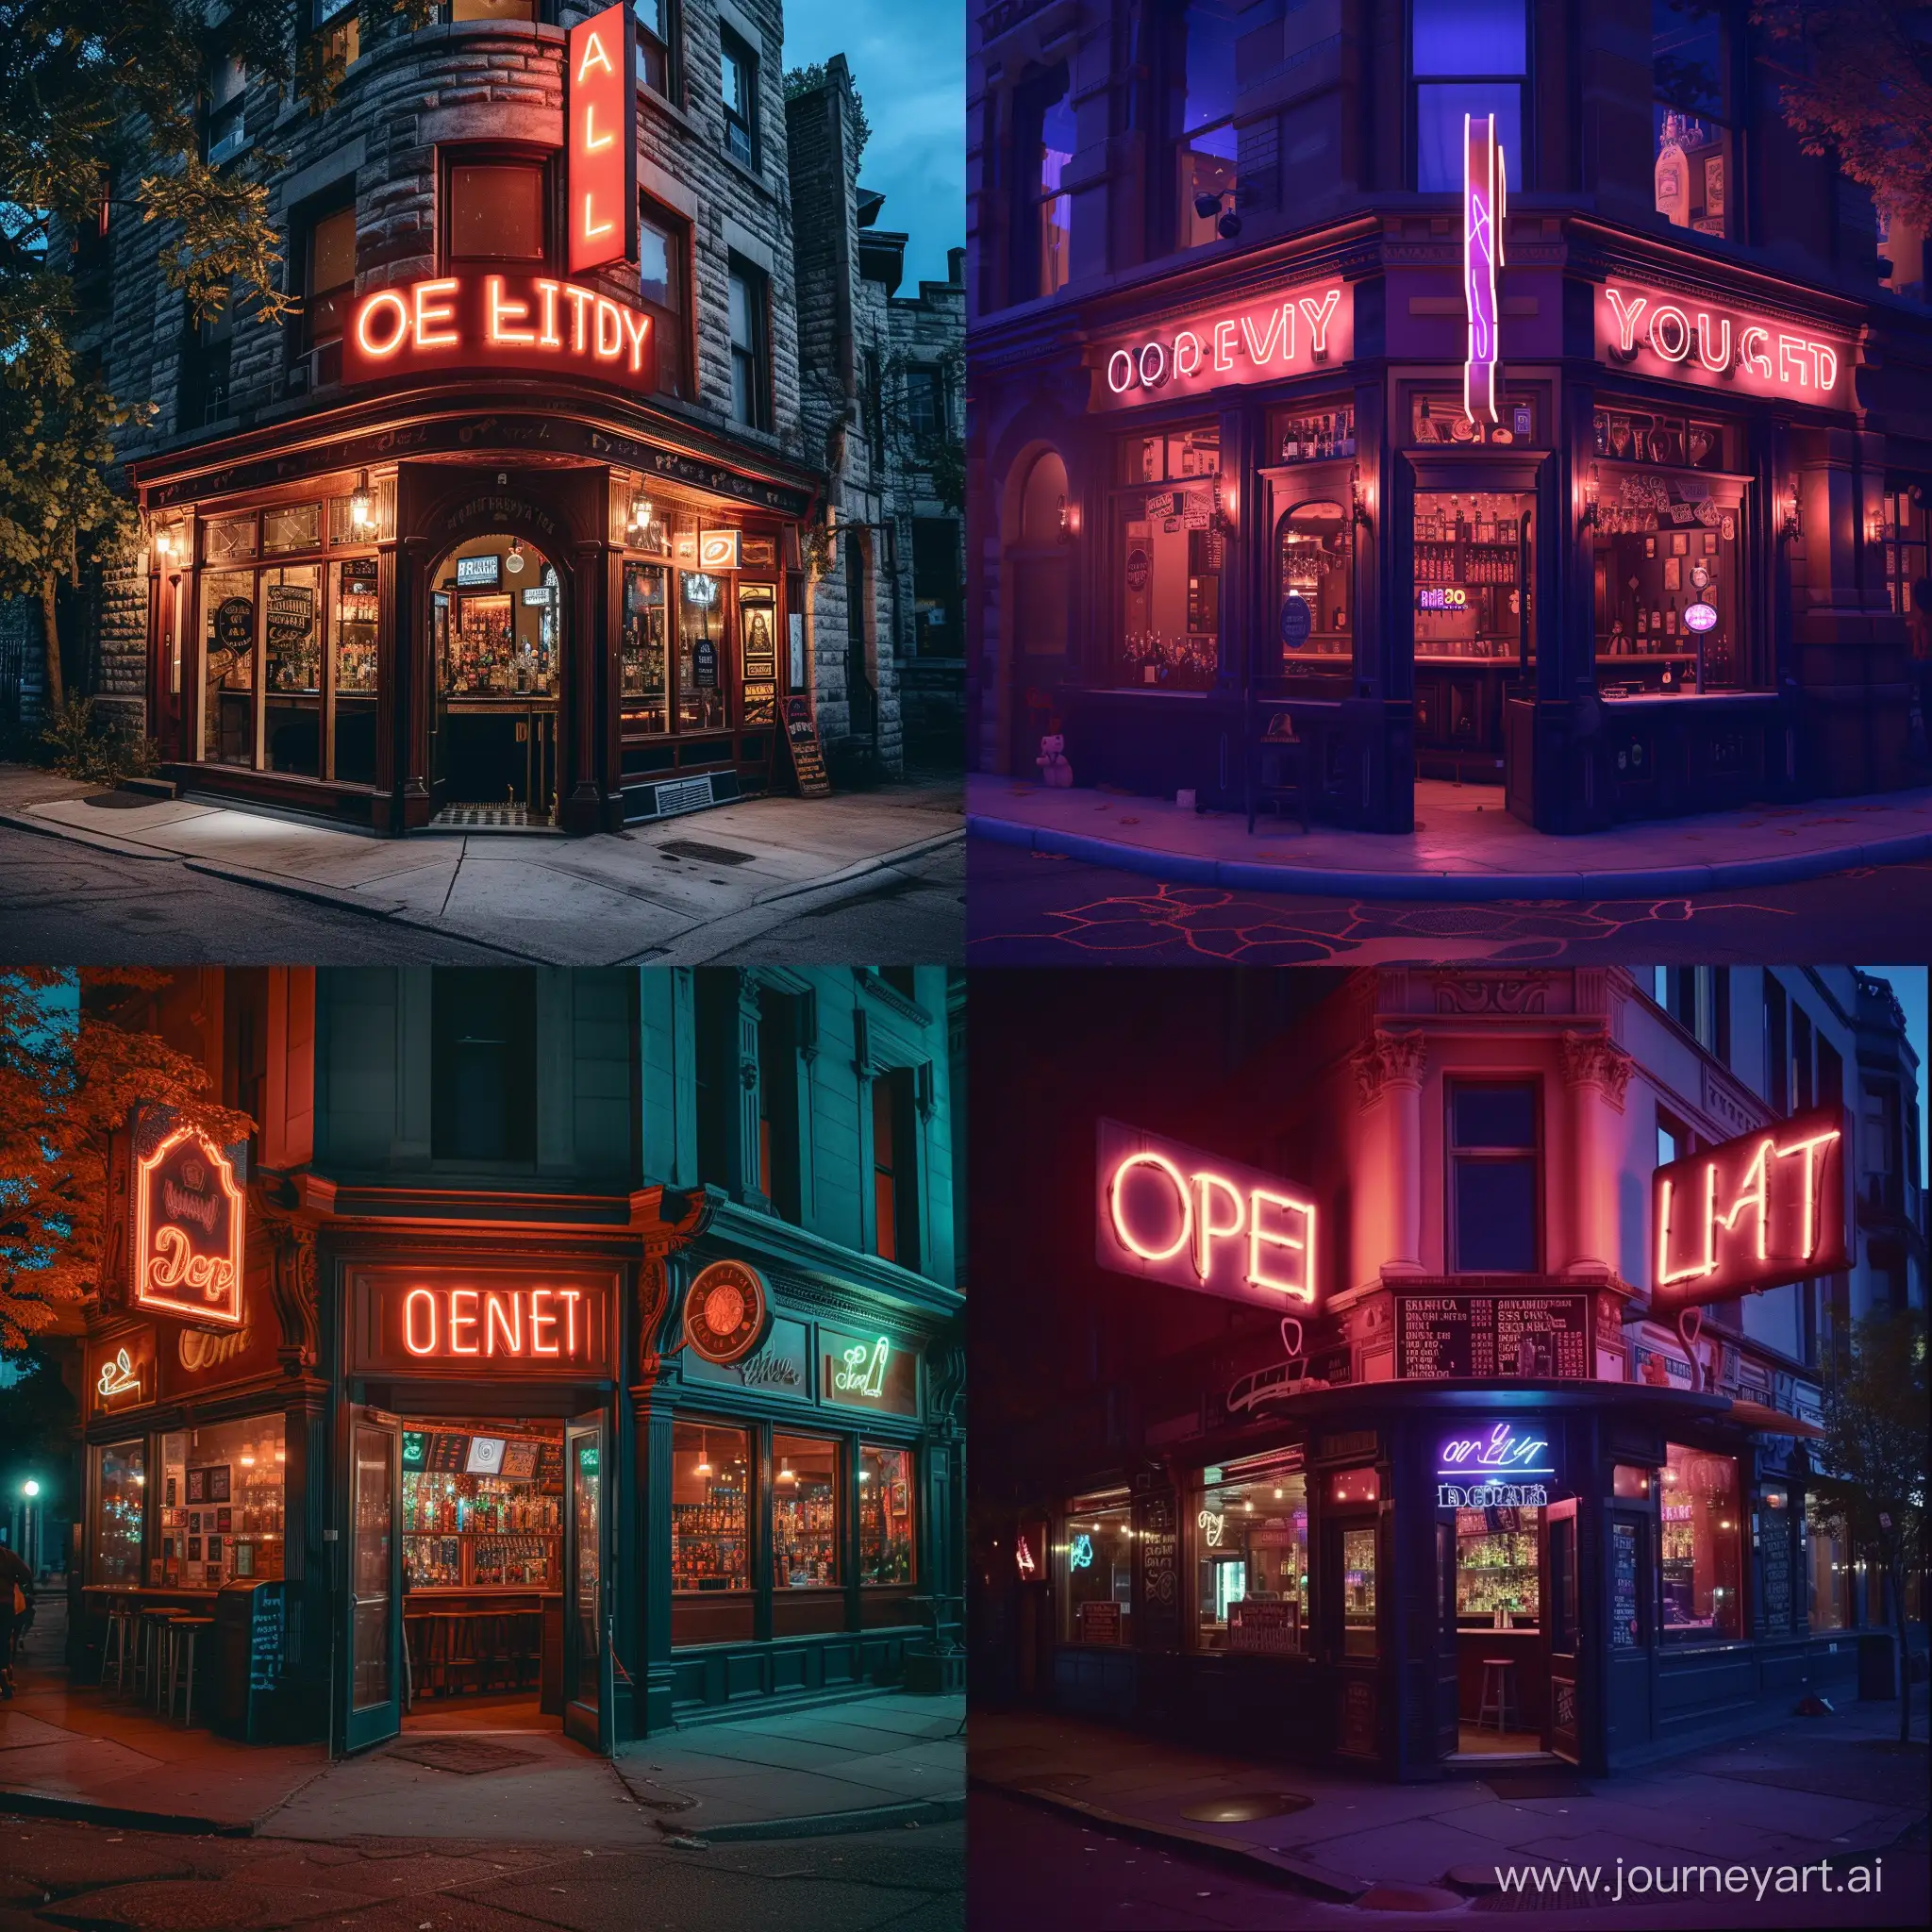 A corner bar with neon sign that says '' open late ''